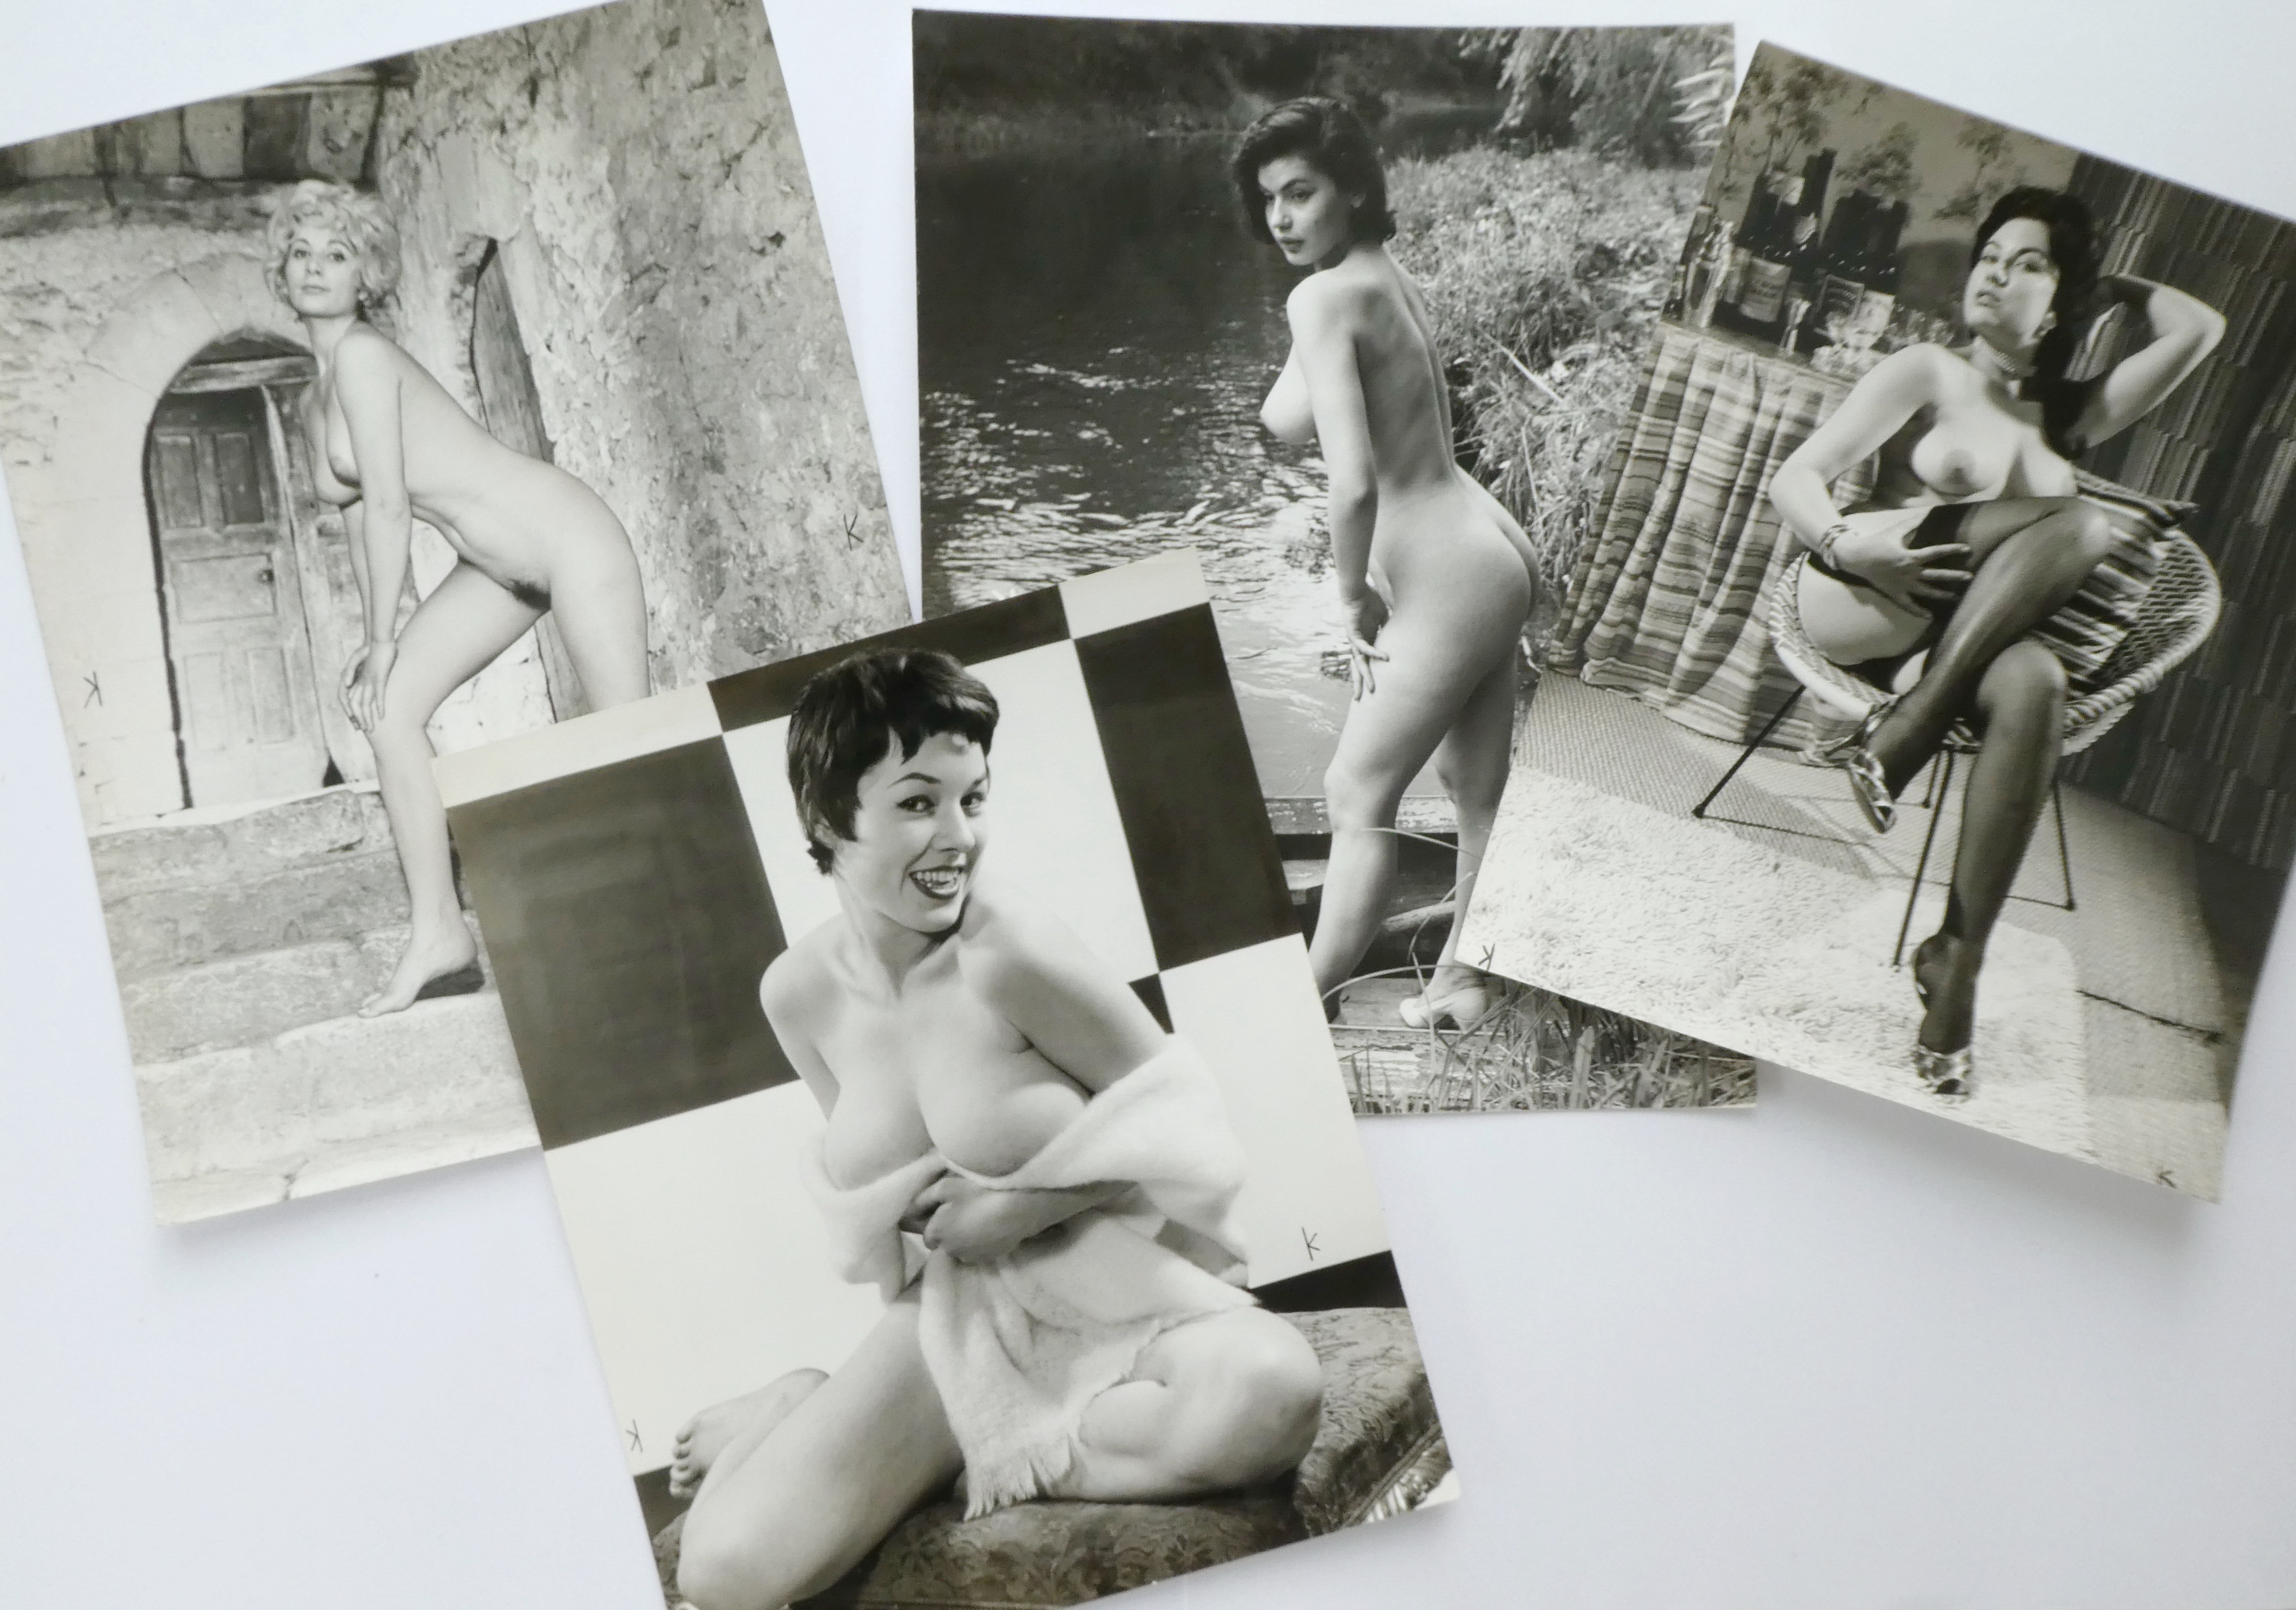 Pinup/glamour photos in large format, many by famous photographers